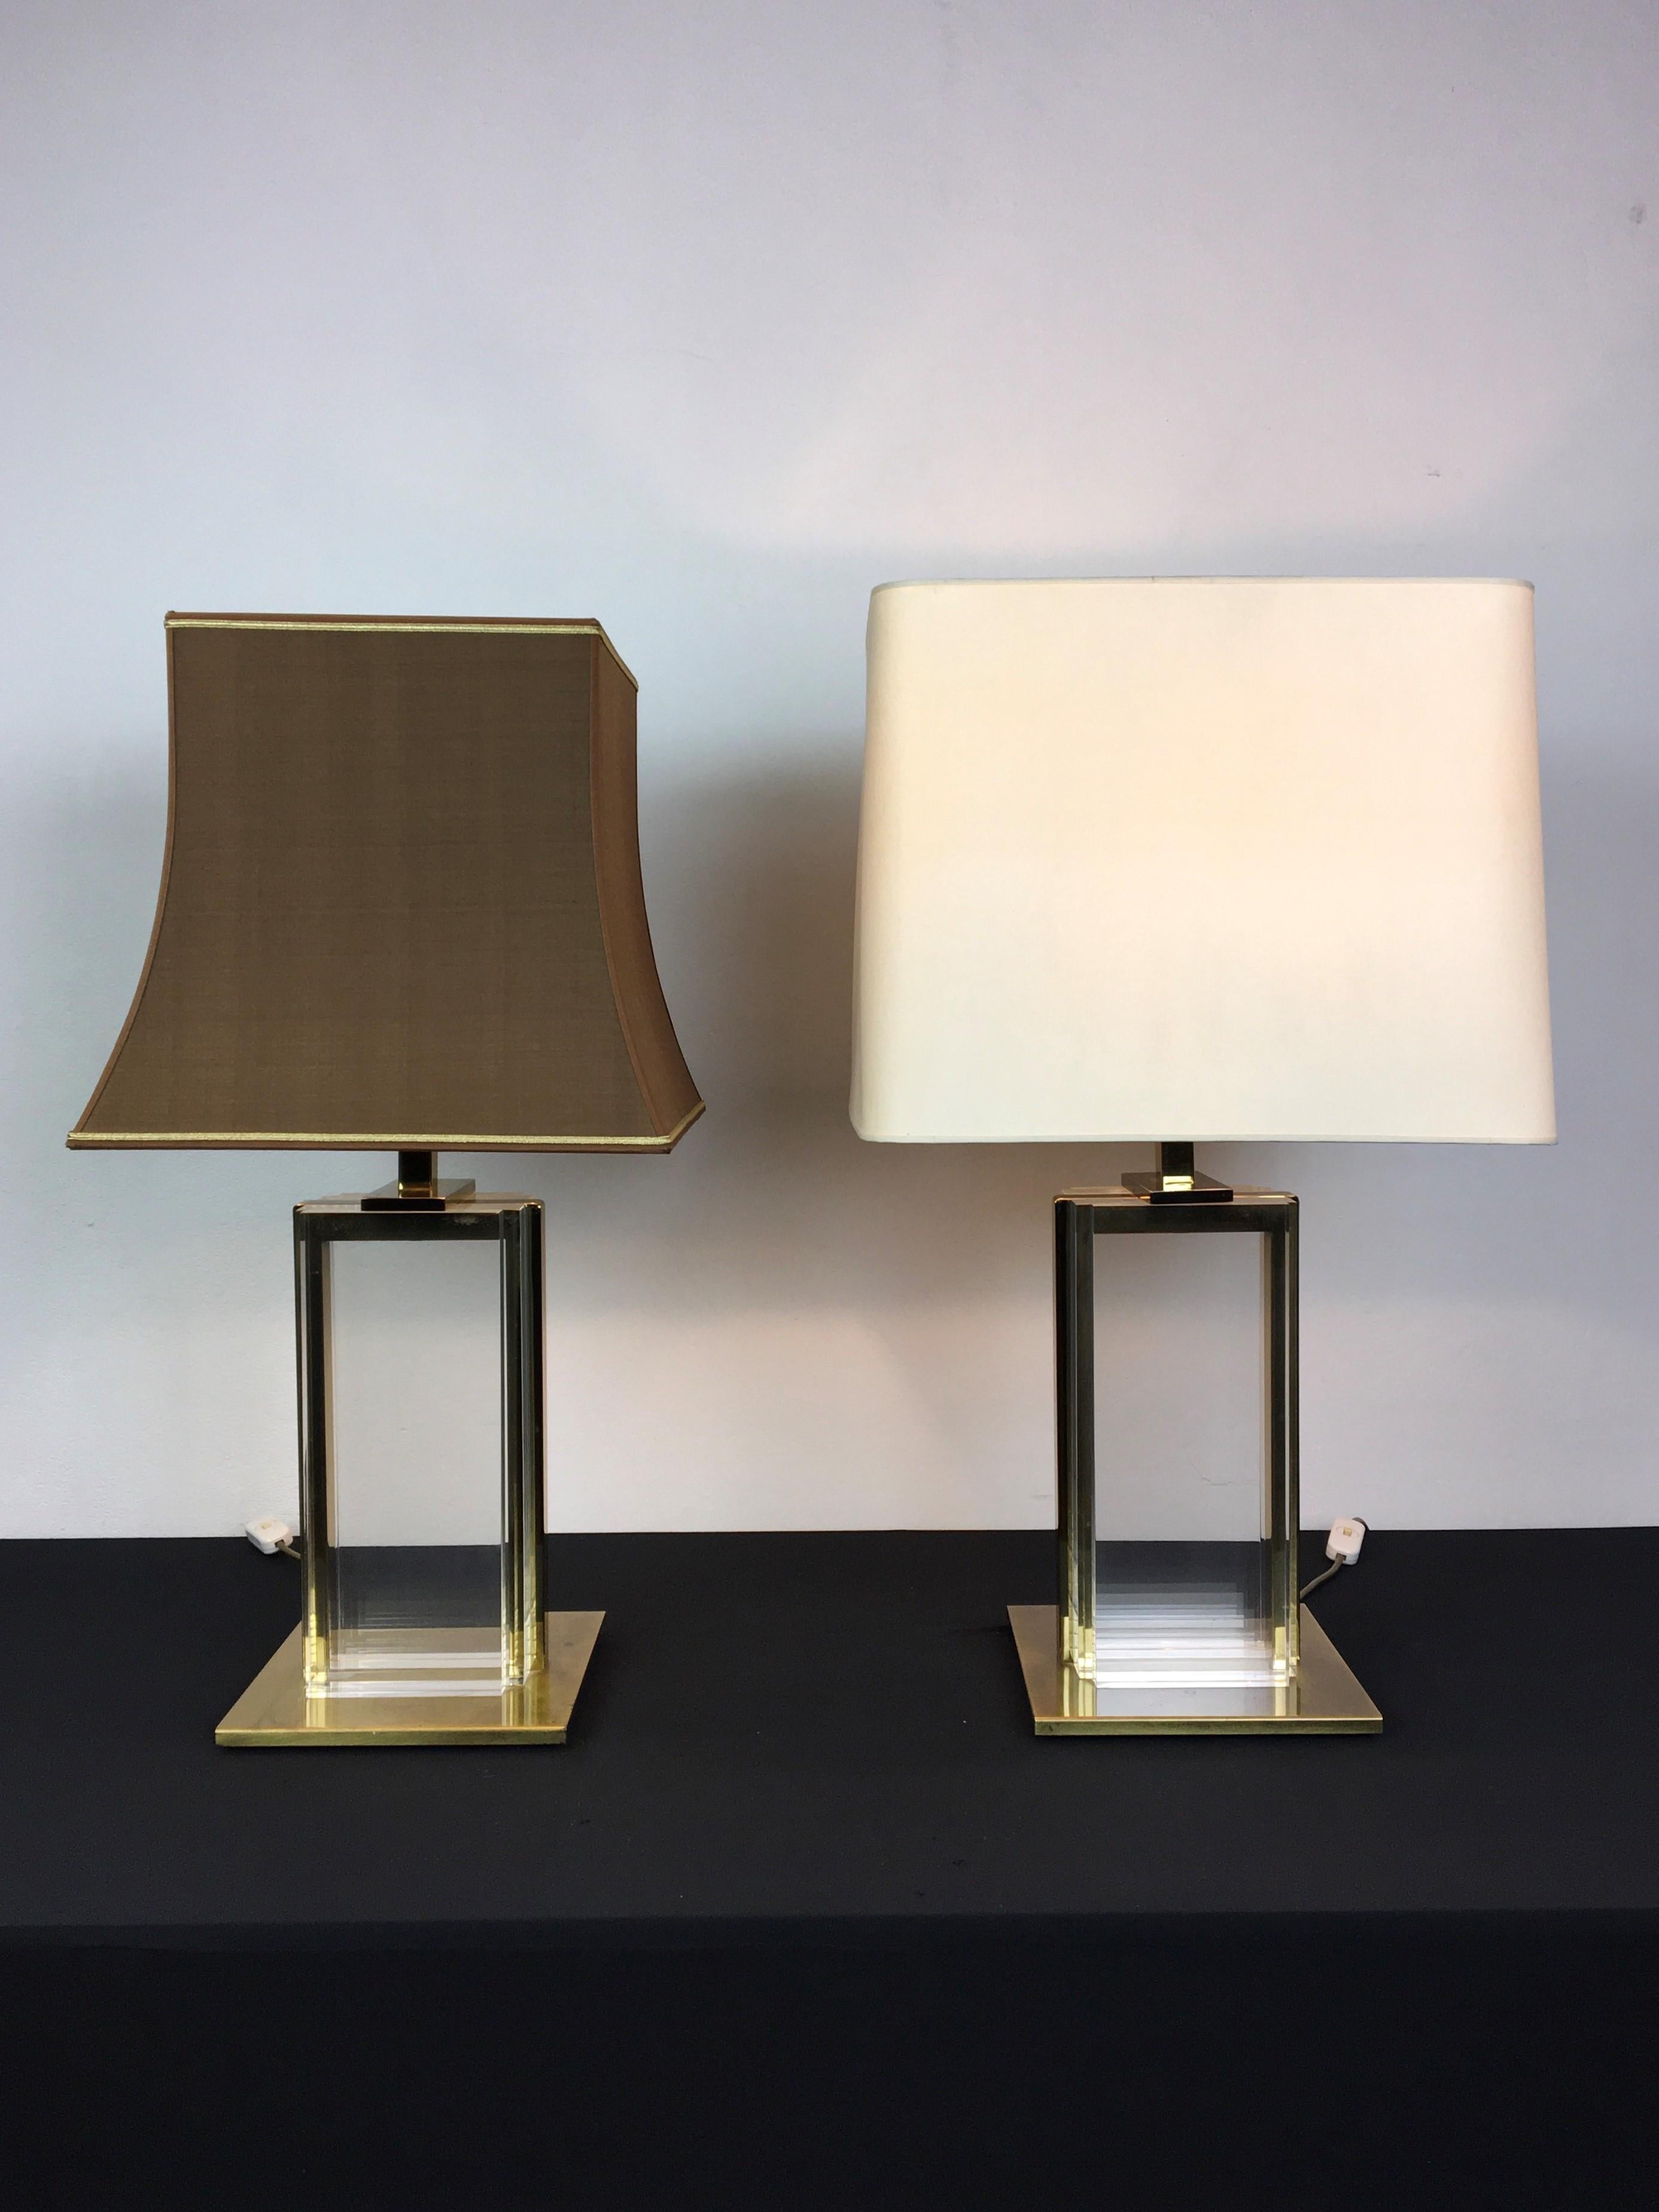 Pair of Belgo Chrome Table Lamps, Lucite and Brass, 1970s For Sale 12